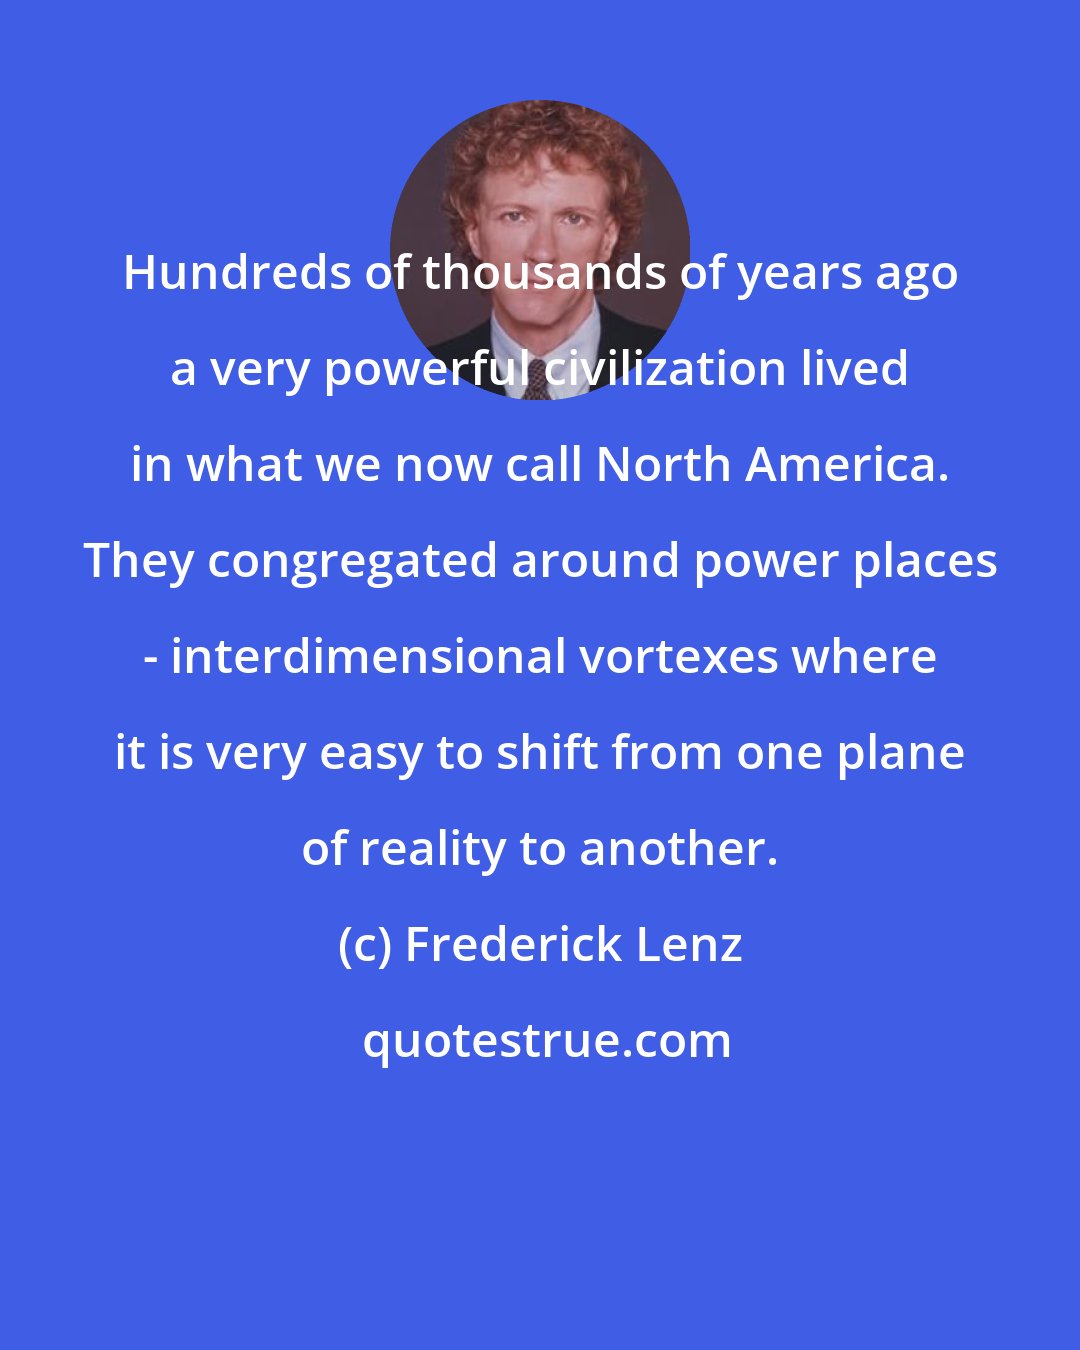 Frederick Lenz: Hundreds of thousands of years ago a very powerful civilization lived in what we now call North America. They congregated around power places - interdimensional vortexes where it is very easy to shift from one plane of reality to another.